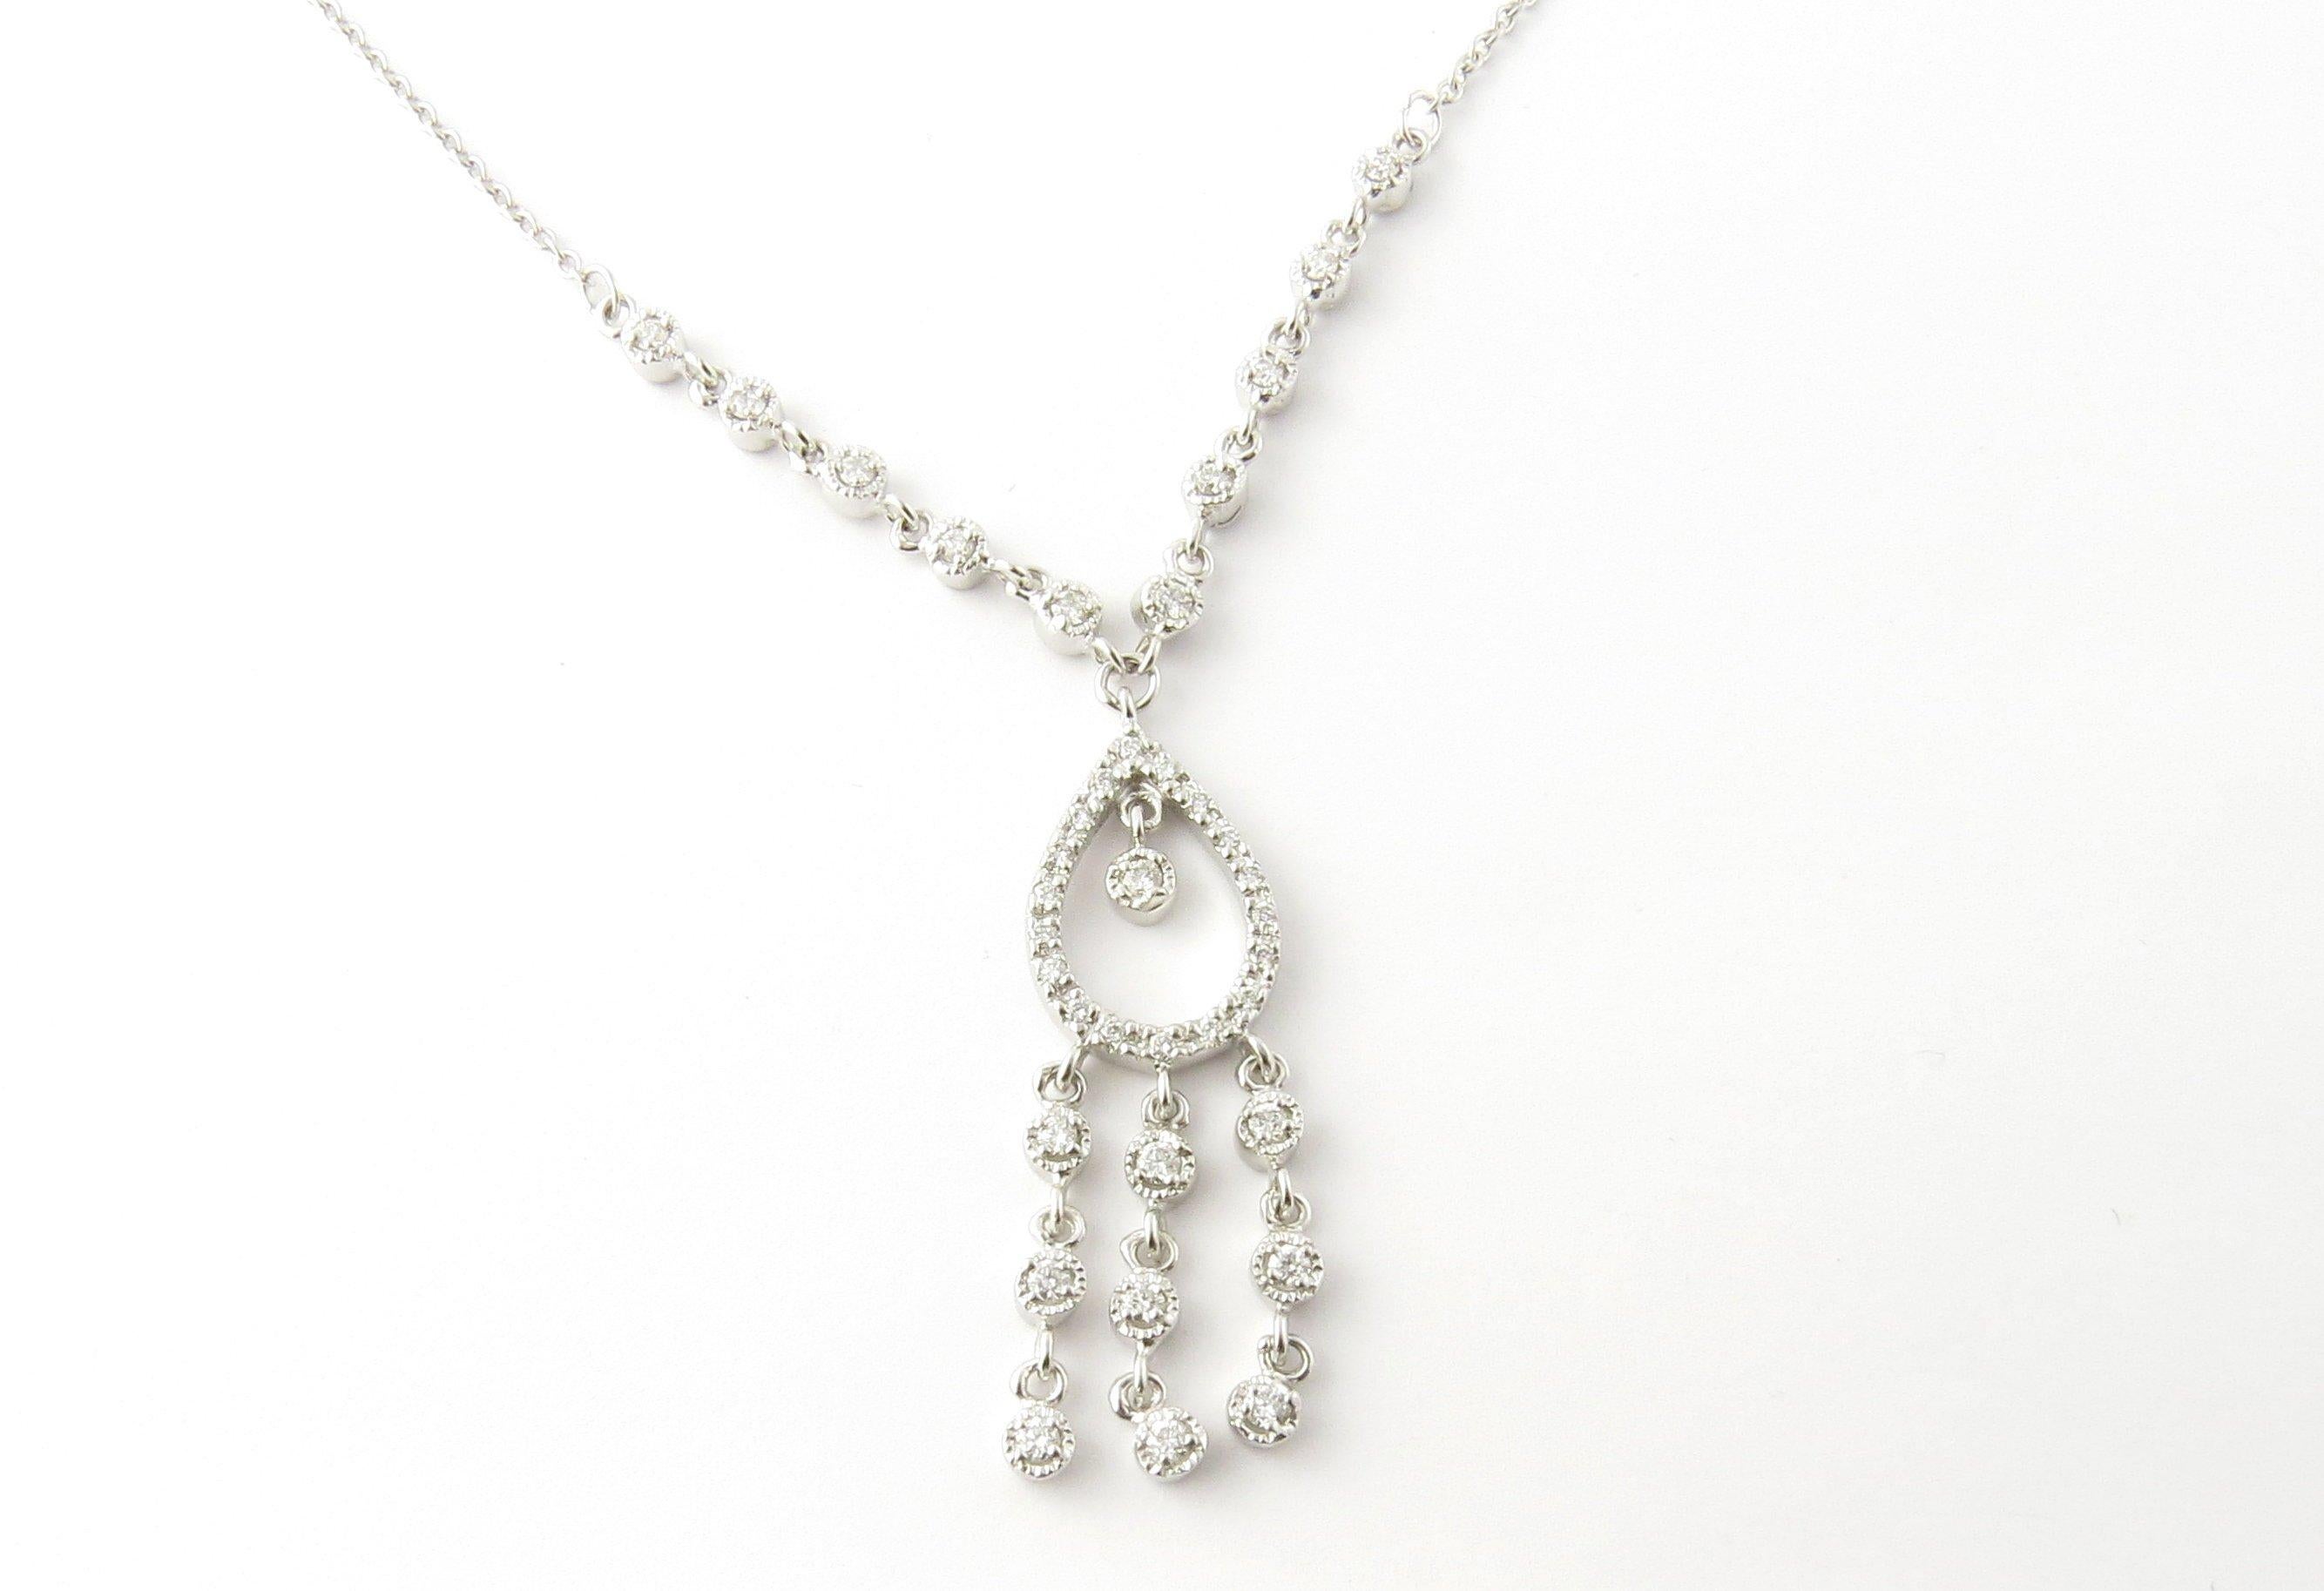 Vintage 14 Karat White Gold Diamond Pendant Necklace. This dazzling dangling pendant features 38 round brilliant cut diamonds (28 in pendant, 10 on necklace) set in beautifully detailed 14K white gold.
Approximate total diamond weight: .79 ct.